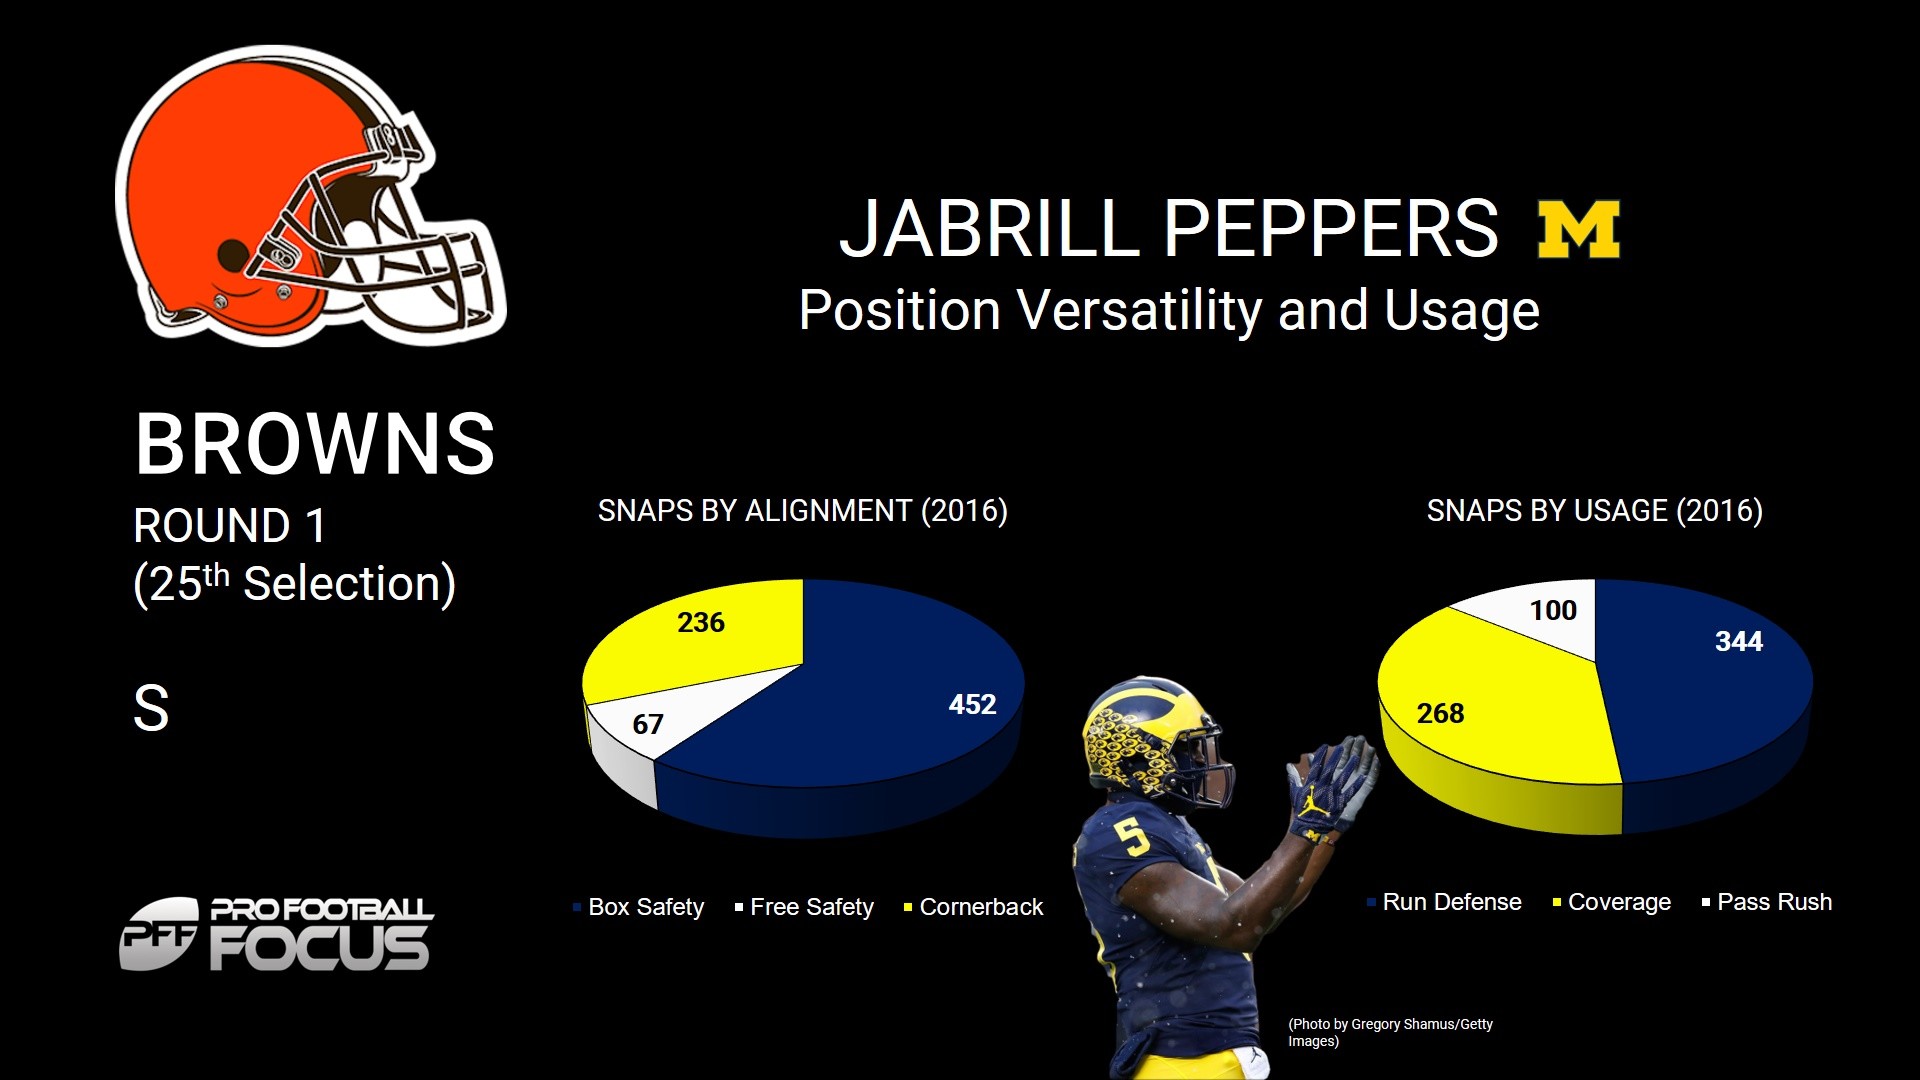 1920x1080 Peppers brings position flexibility: In 2016, he lined up as a free safety  67 times, as a box safety 452 times, and as a cornerback 236 times.